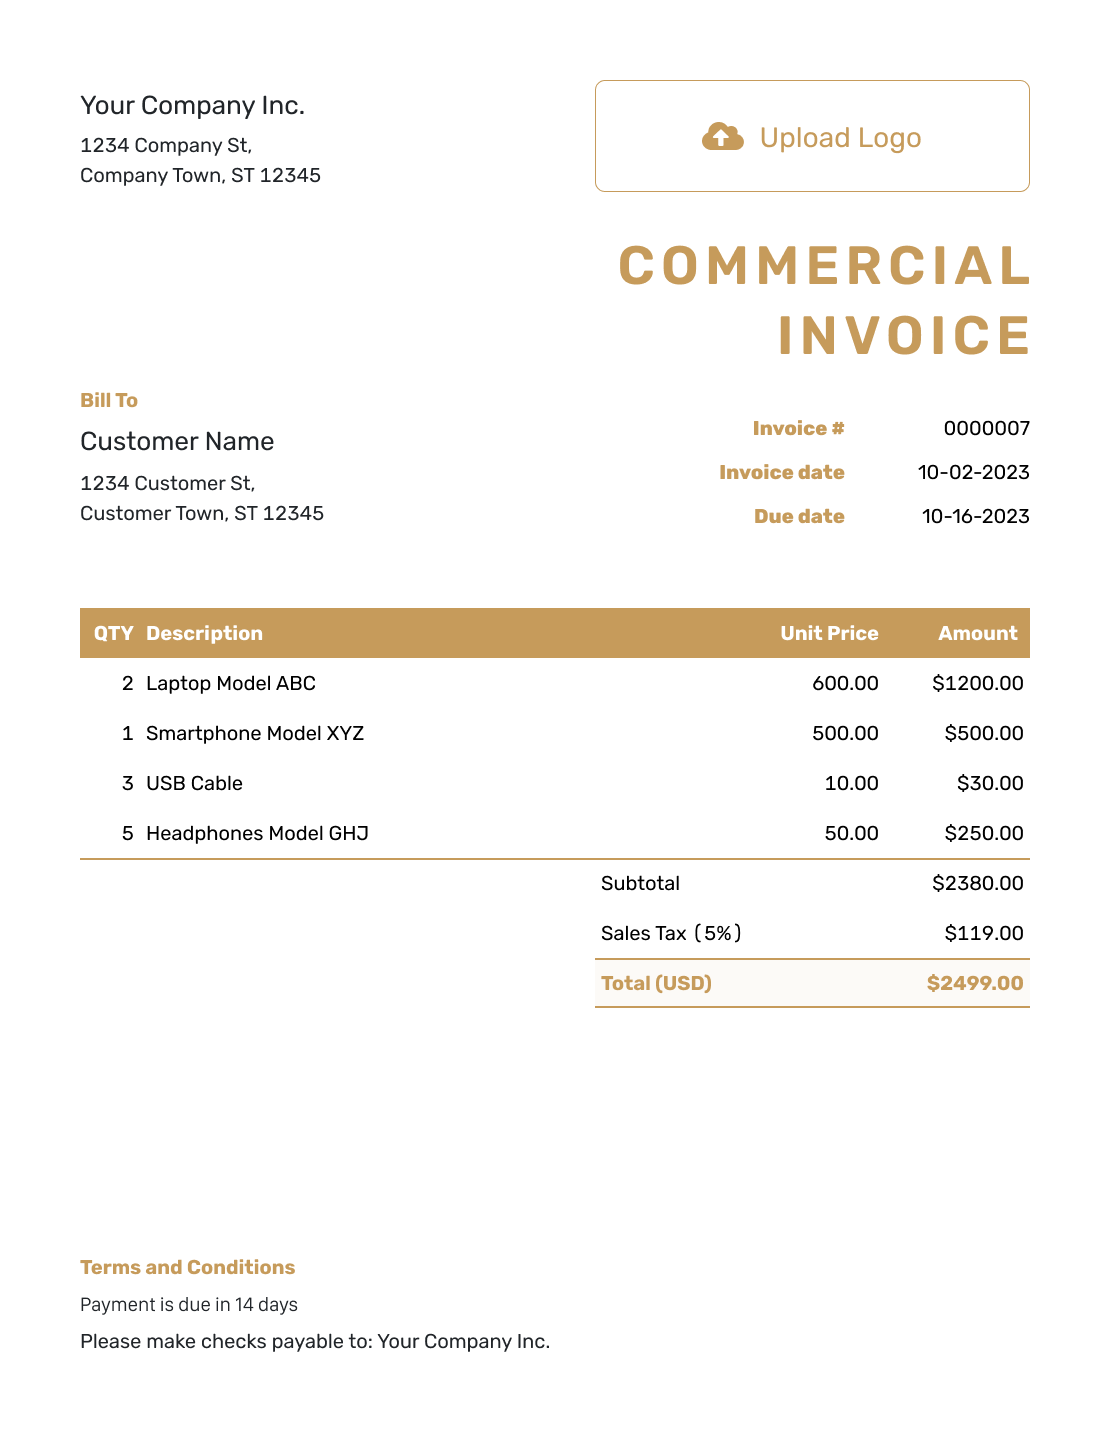 Basic Commercial Invoice Template